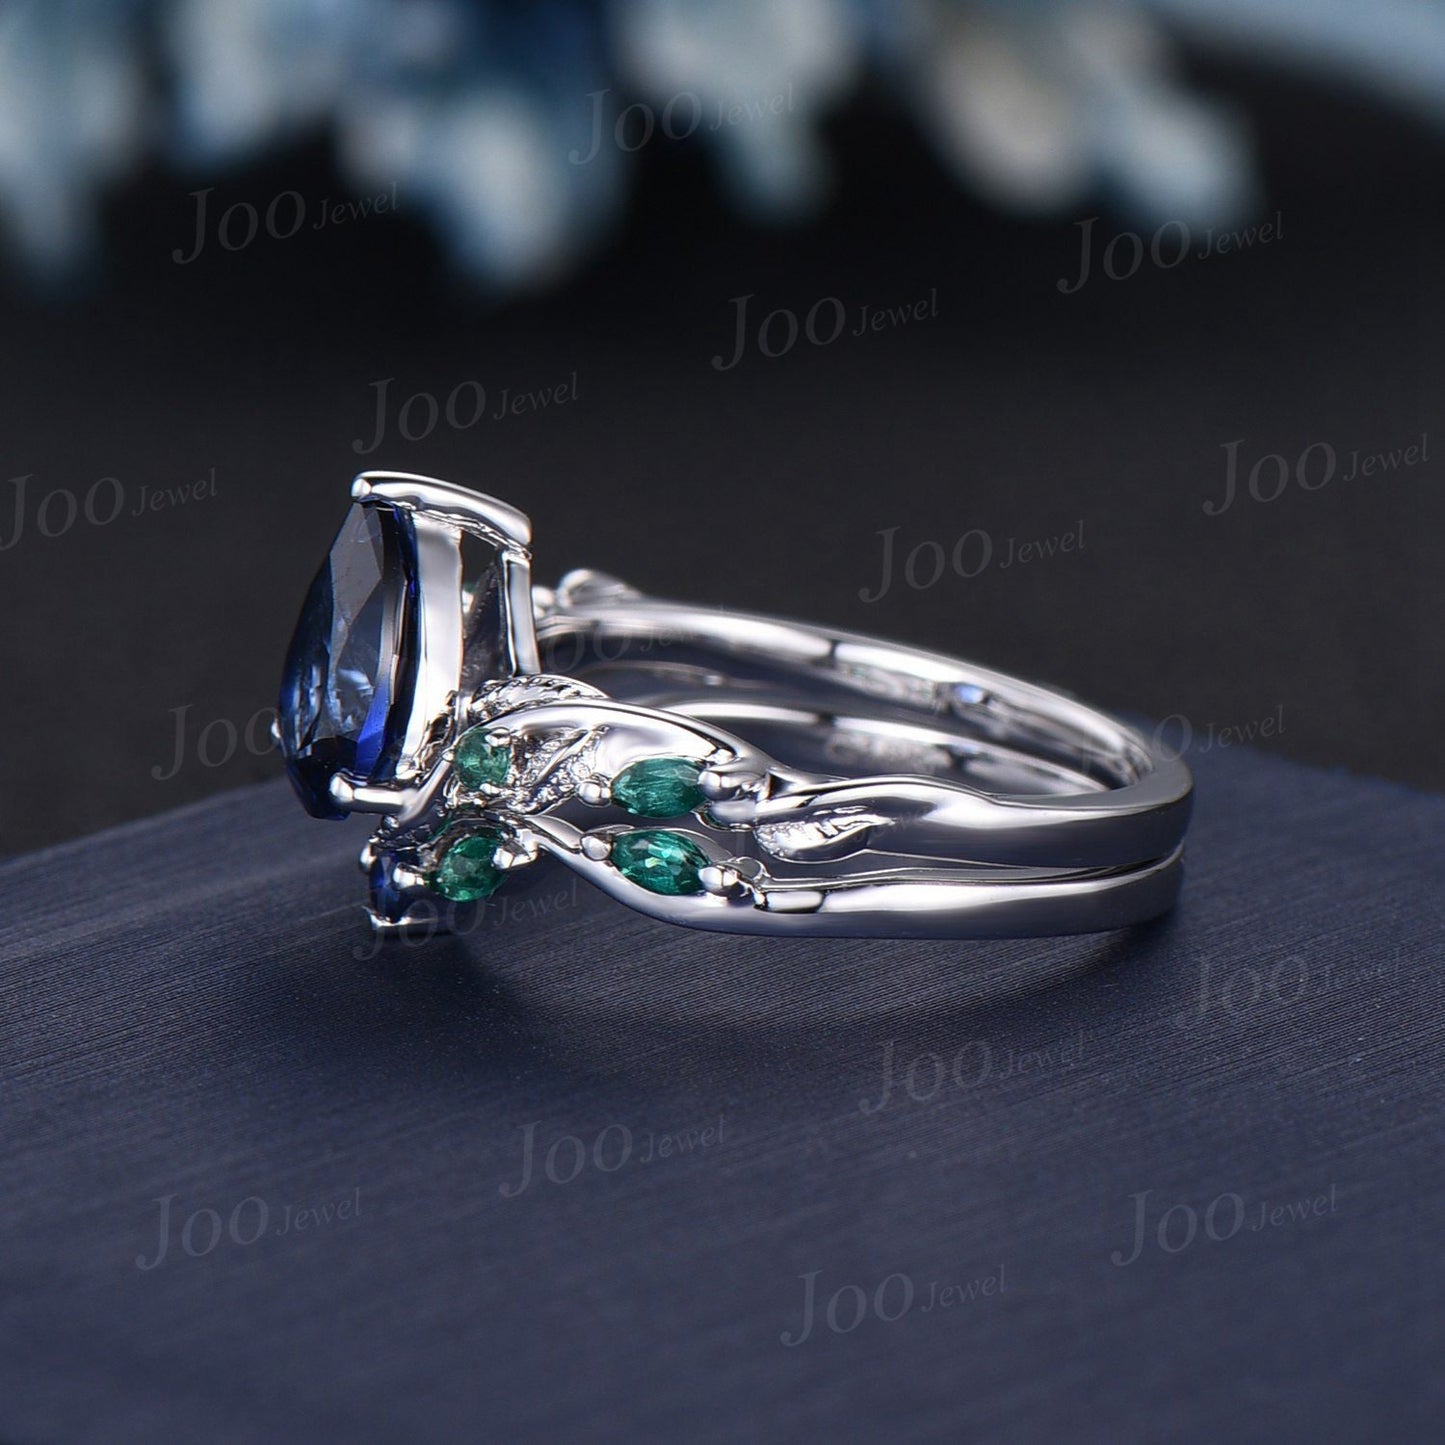 Twig Vine Blue Sapphire Engagement Ring Set Vintage Nature Inspired Pear Cut Blue Sapphire Emerald Promise Ring Antique Noble Gift for Women